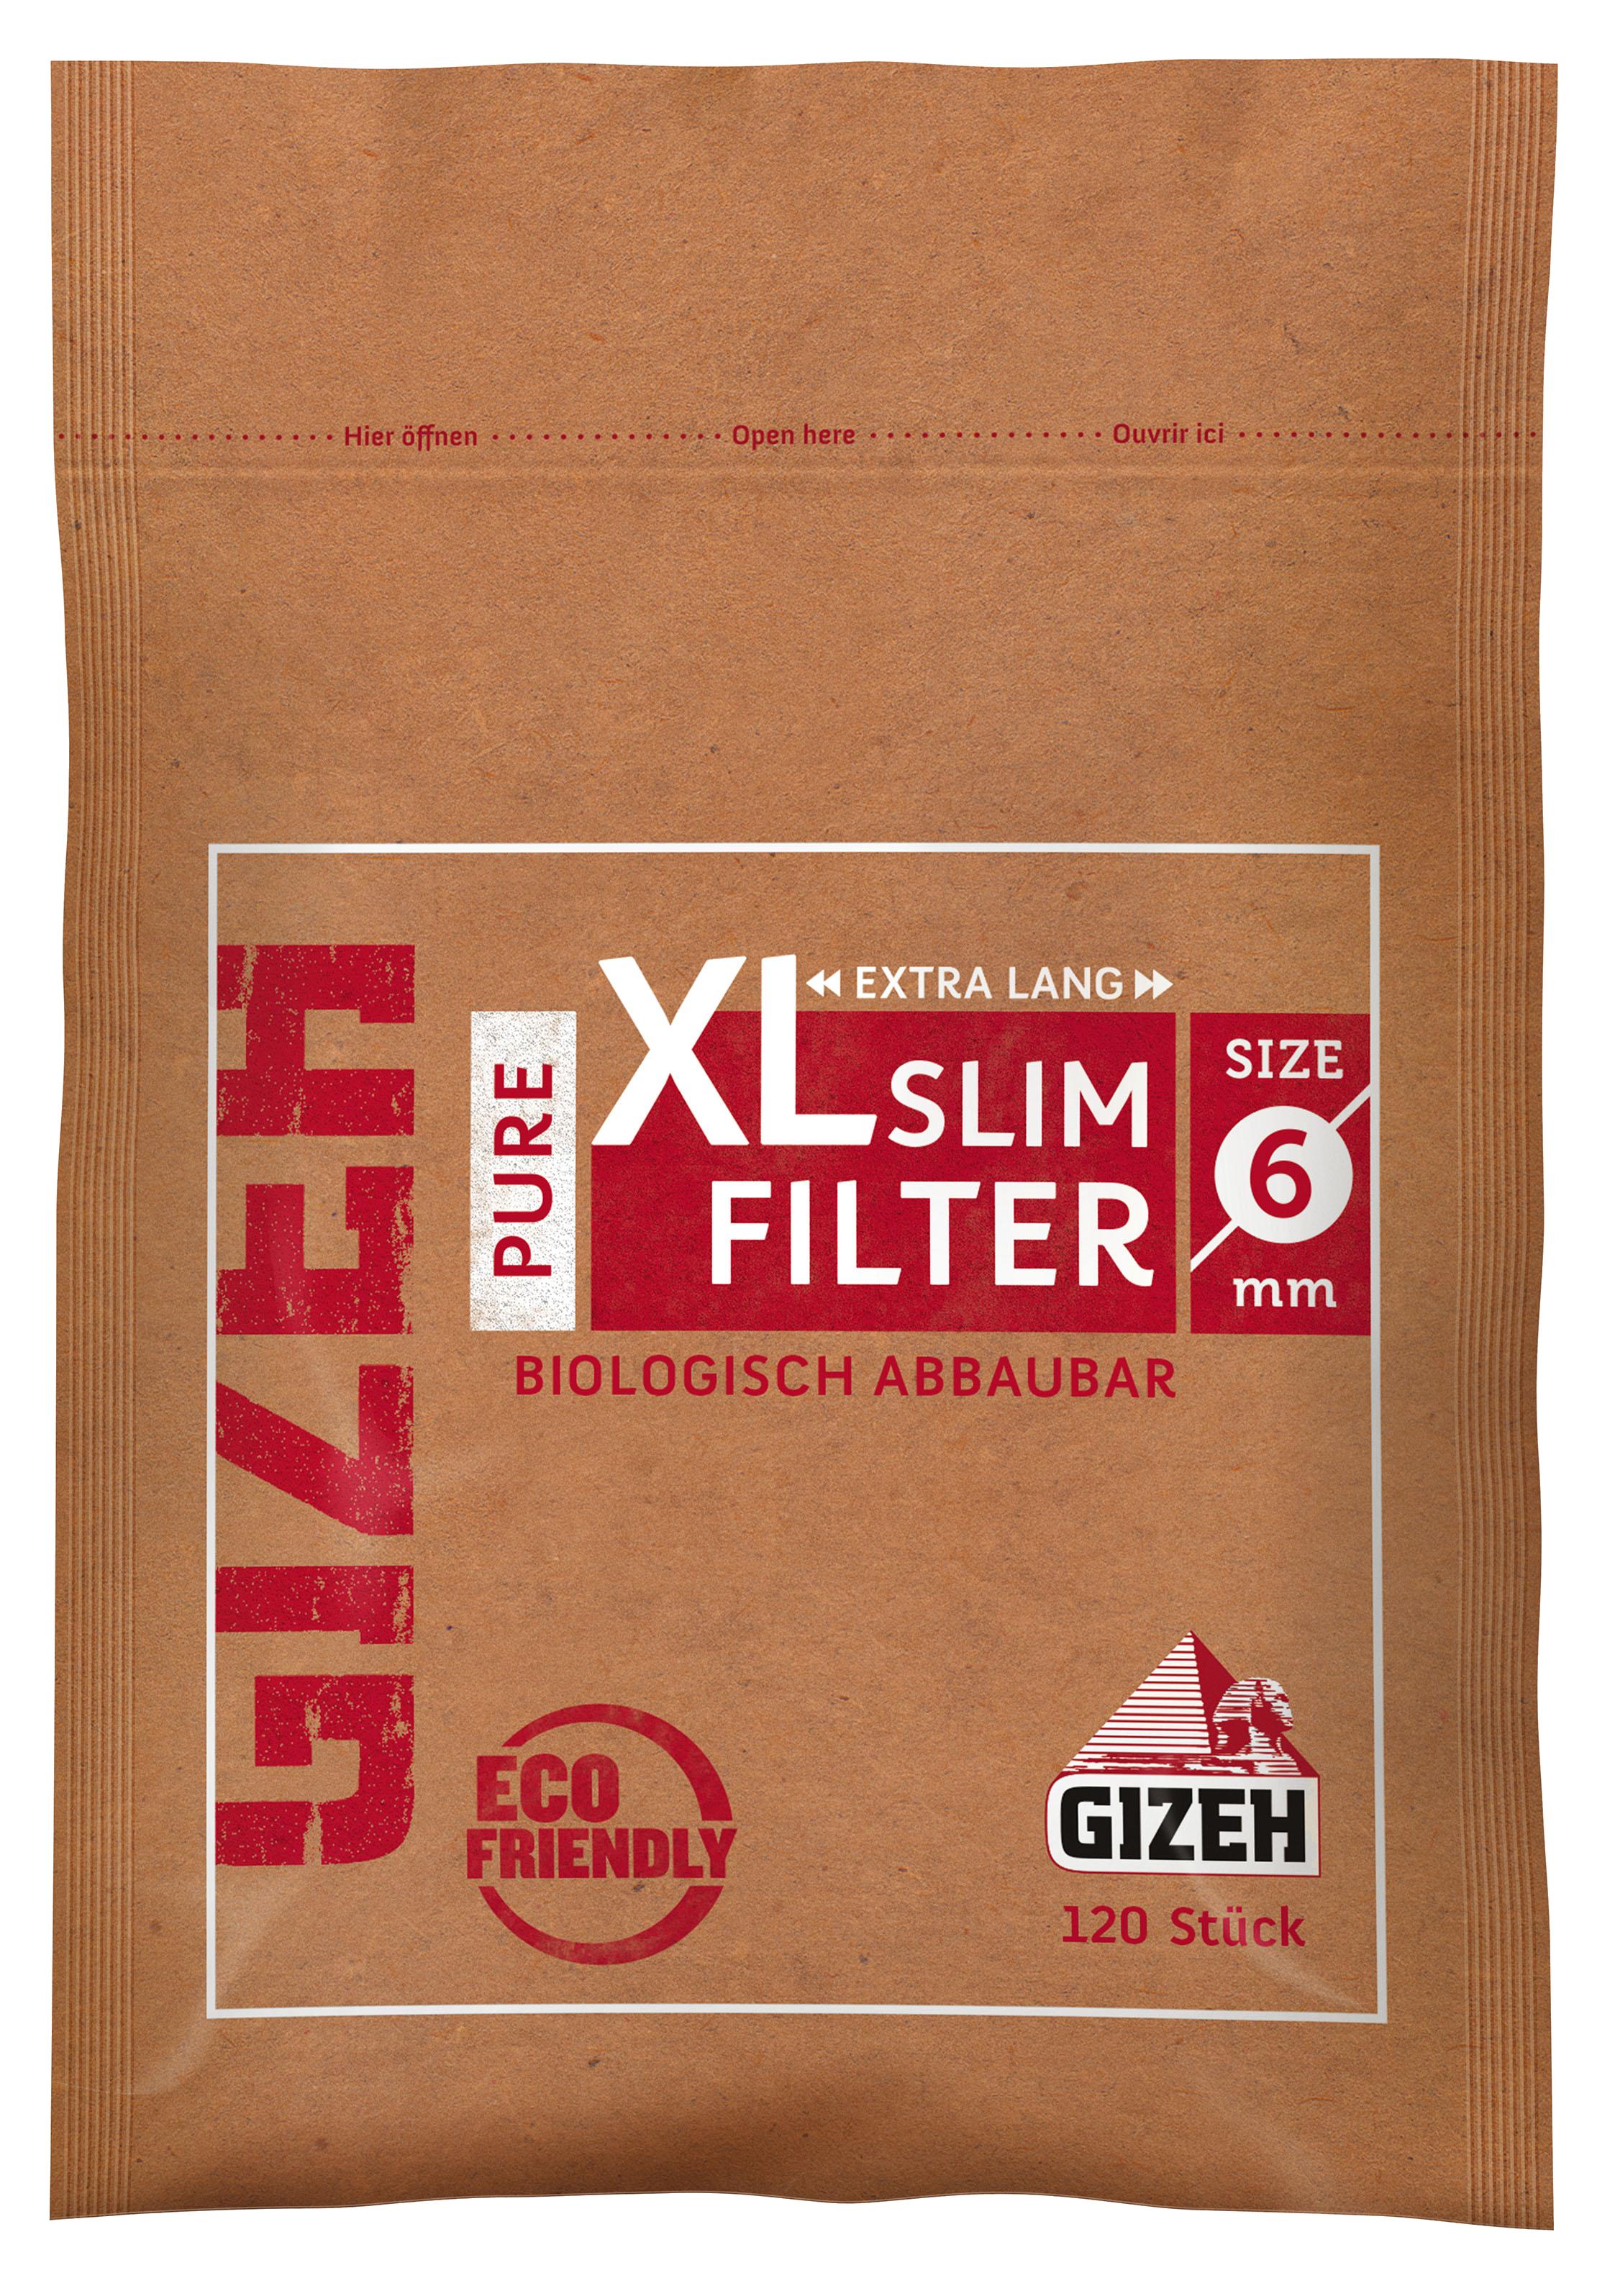 Gizeh Pure XL Slim Filter 6mm  10 x 120 Filter